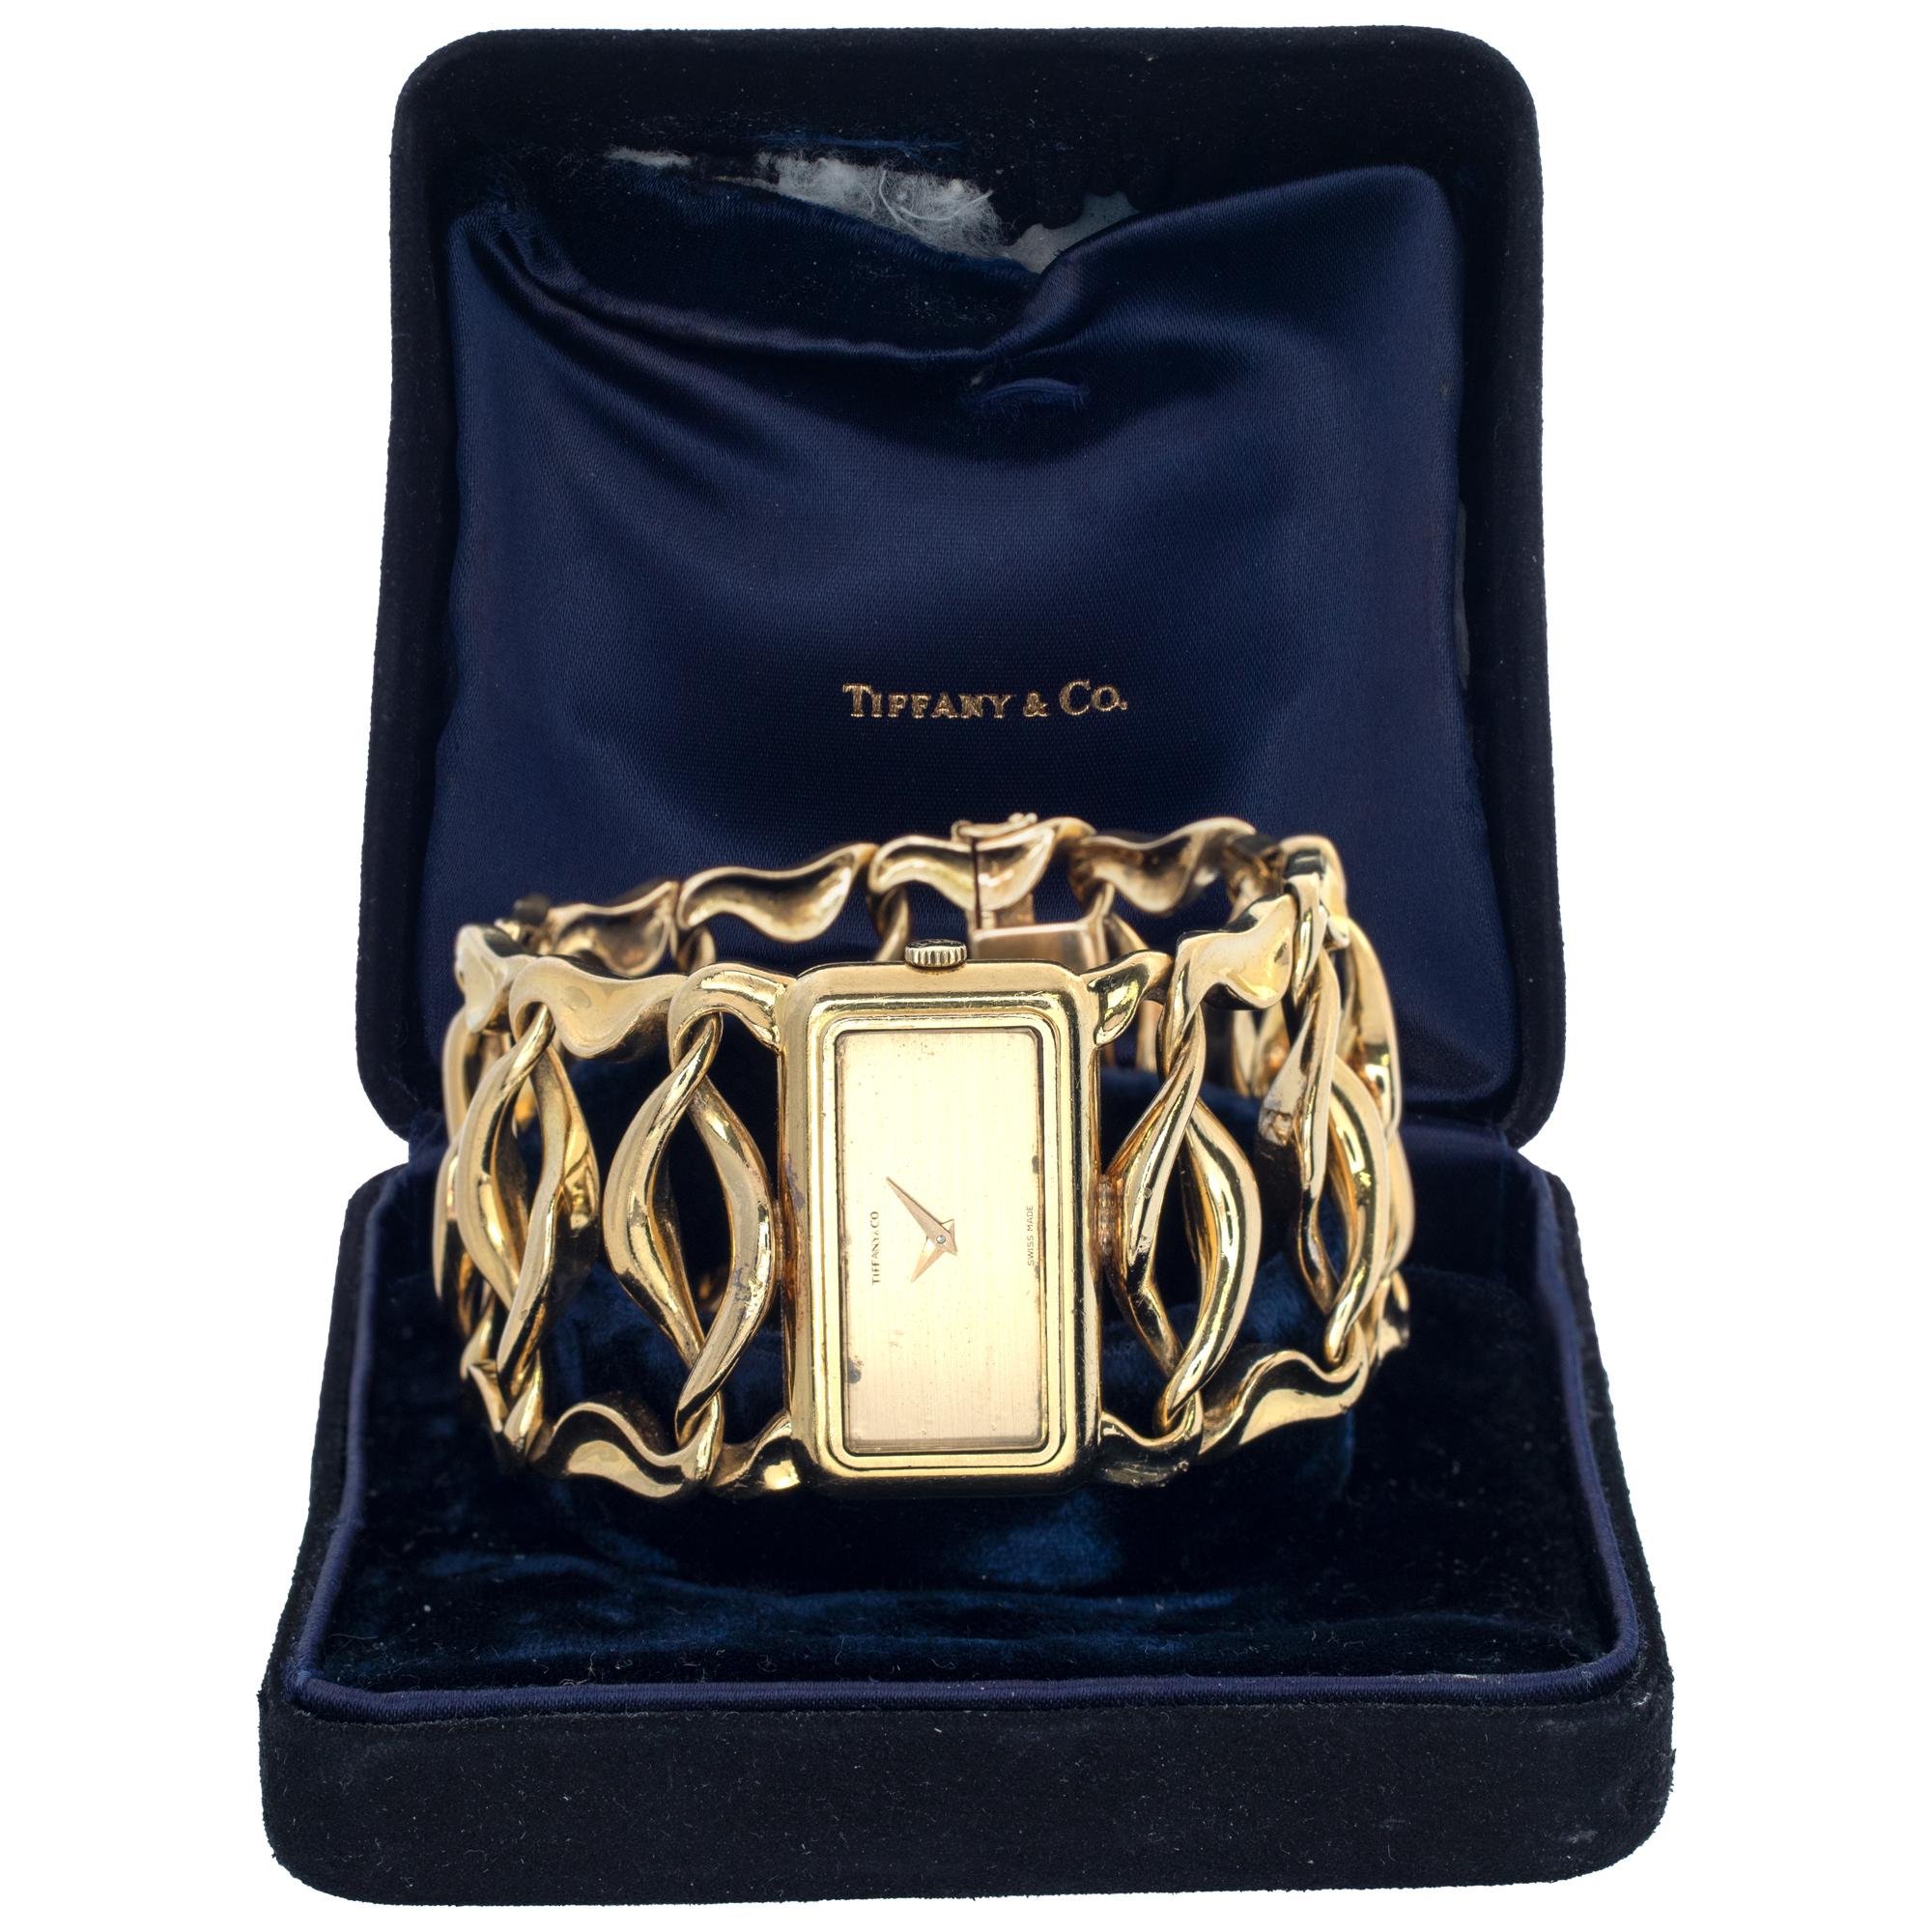 Tiffany & Co. Classic 18k Yellow Gold Bracelet Watch In Excellent Condition For Sale In Surfside, FL